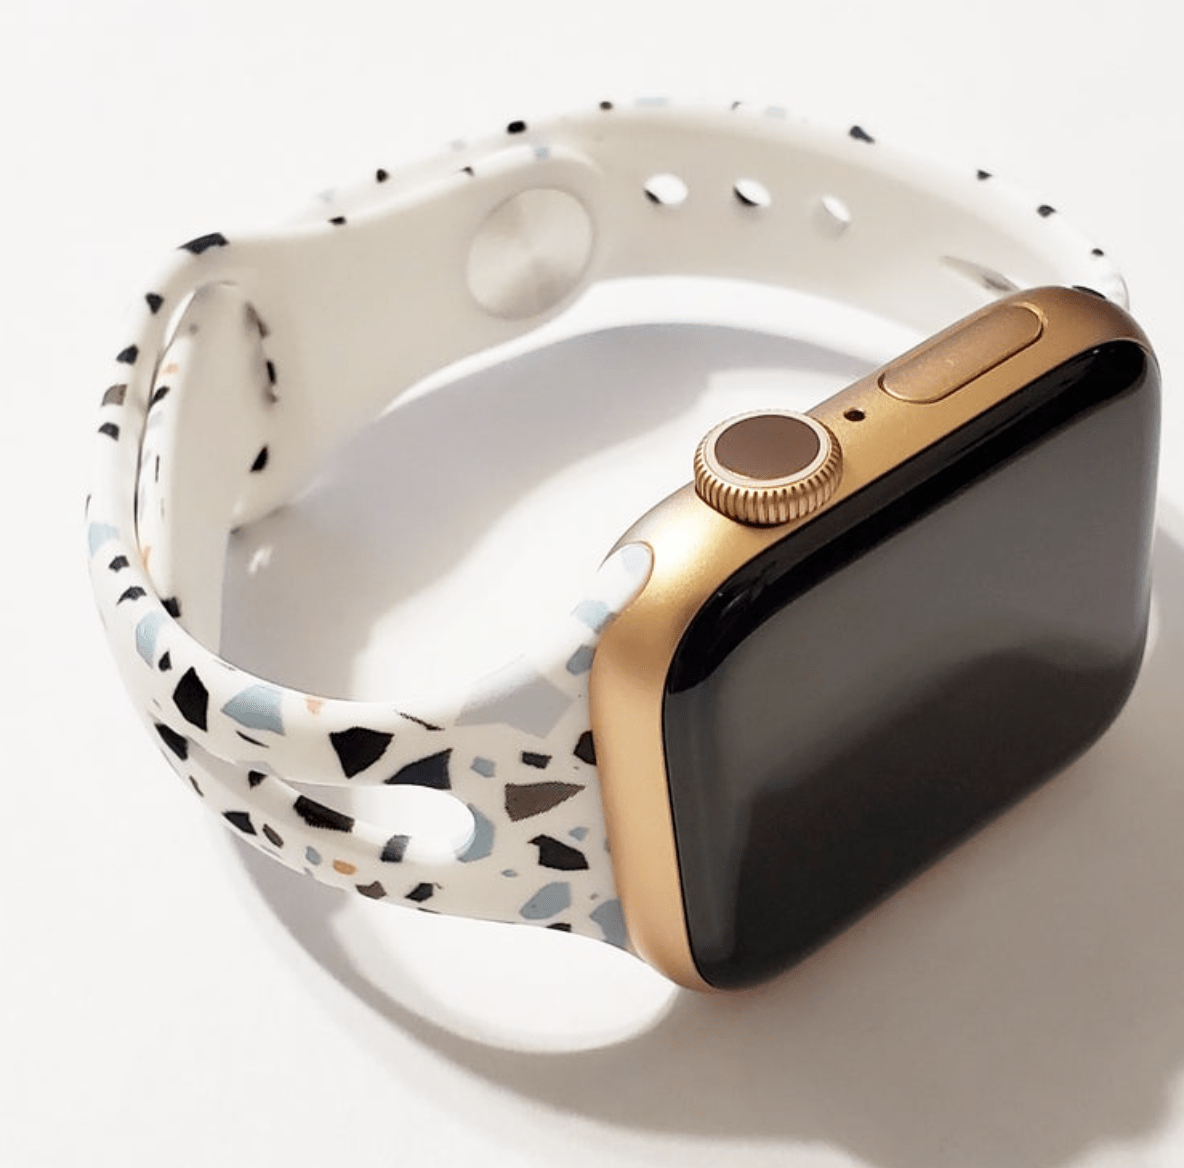 Customize your smartwatch with these designer watch bands